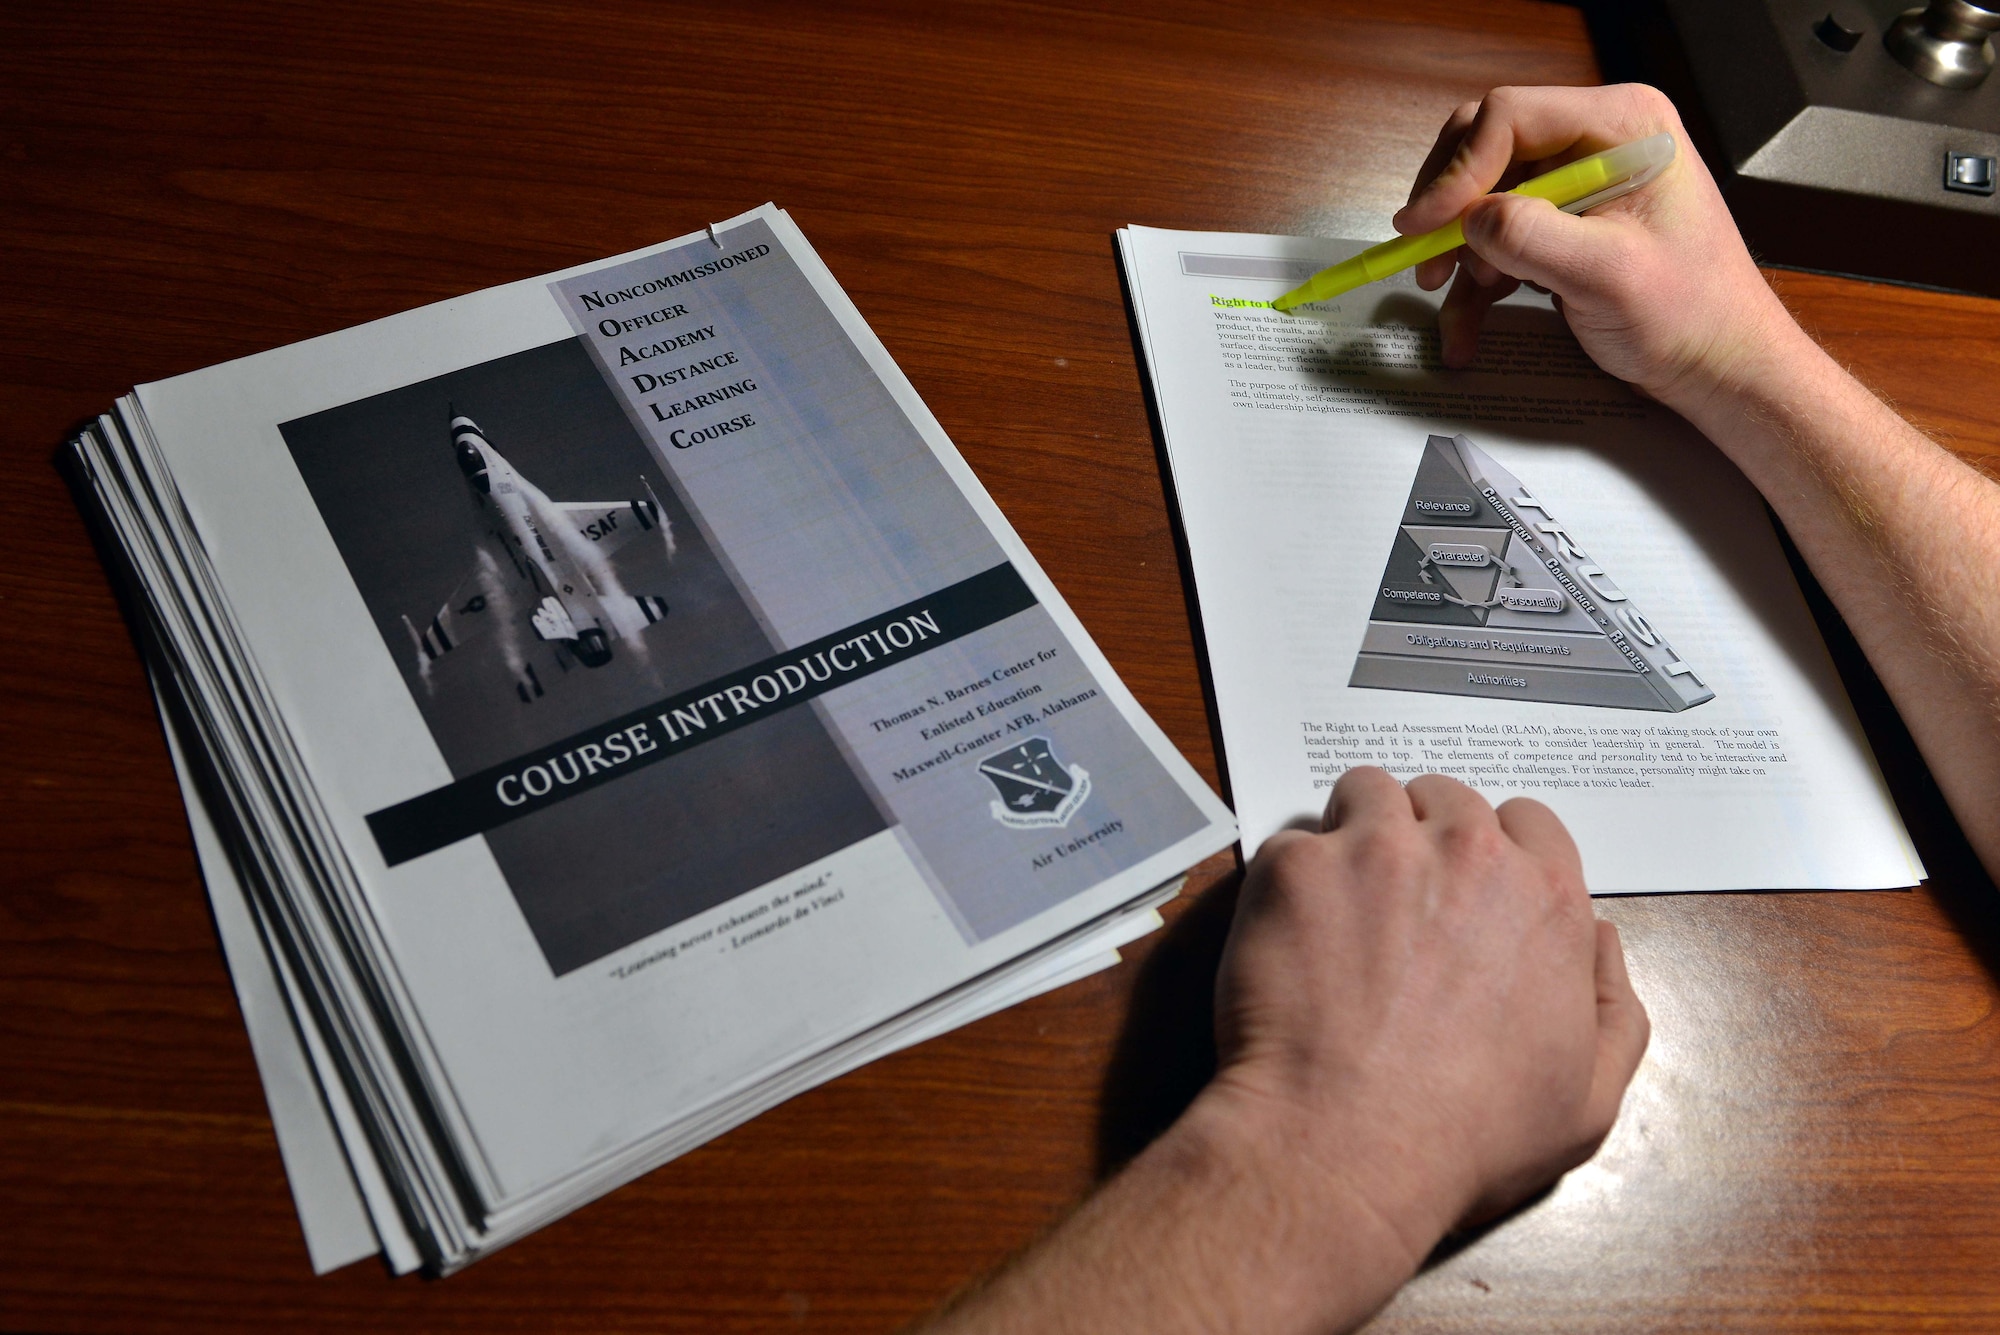 A U.S. Air Force Airman reviews Course 15 material, March 16, 2016, at Incirlik Air Base, Turkey. Course 15 is a distance-learning format for enlisted Airmen that is a portion of the NCO Academy experience. Regardless of rank, when enlisted Airmen reach their seven year time-in-service date, they will receive a notification from the Air Force Personnel Center and are required to enroll and complete Course 15 within a 12-month timeframe. (U.S. Air Force photo by Senior Airman John Nieves Camacho/Released)